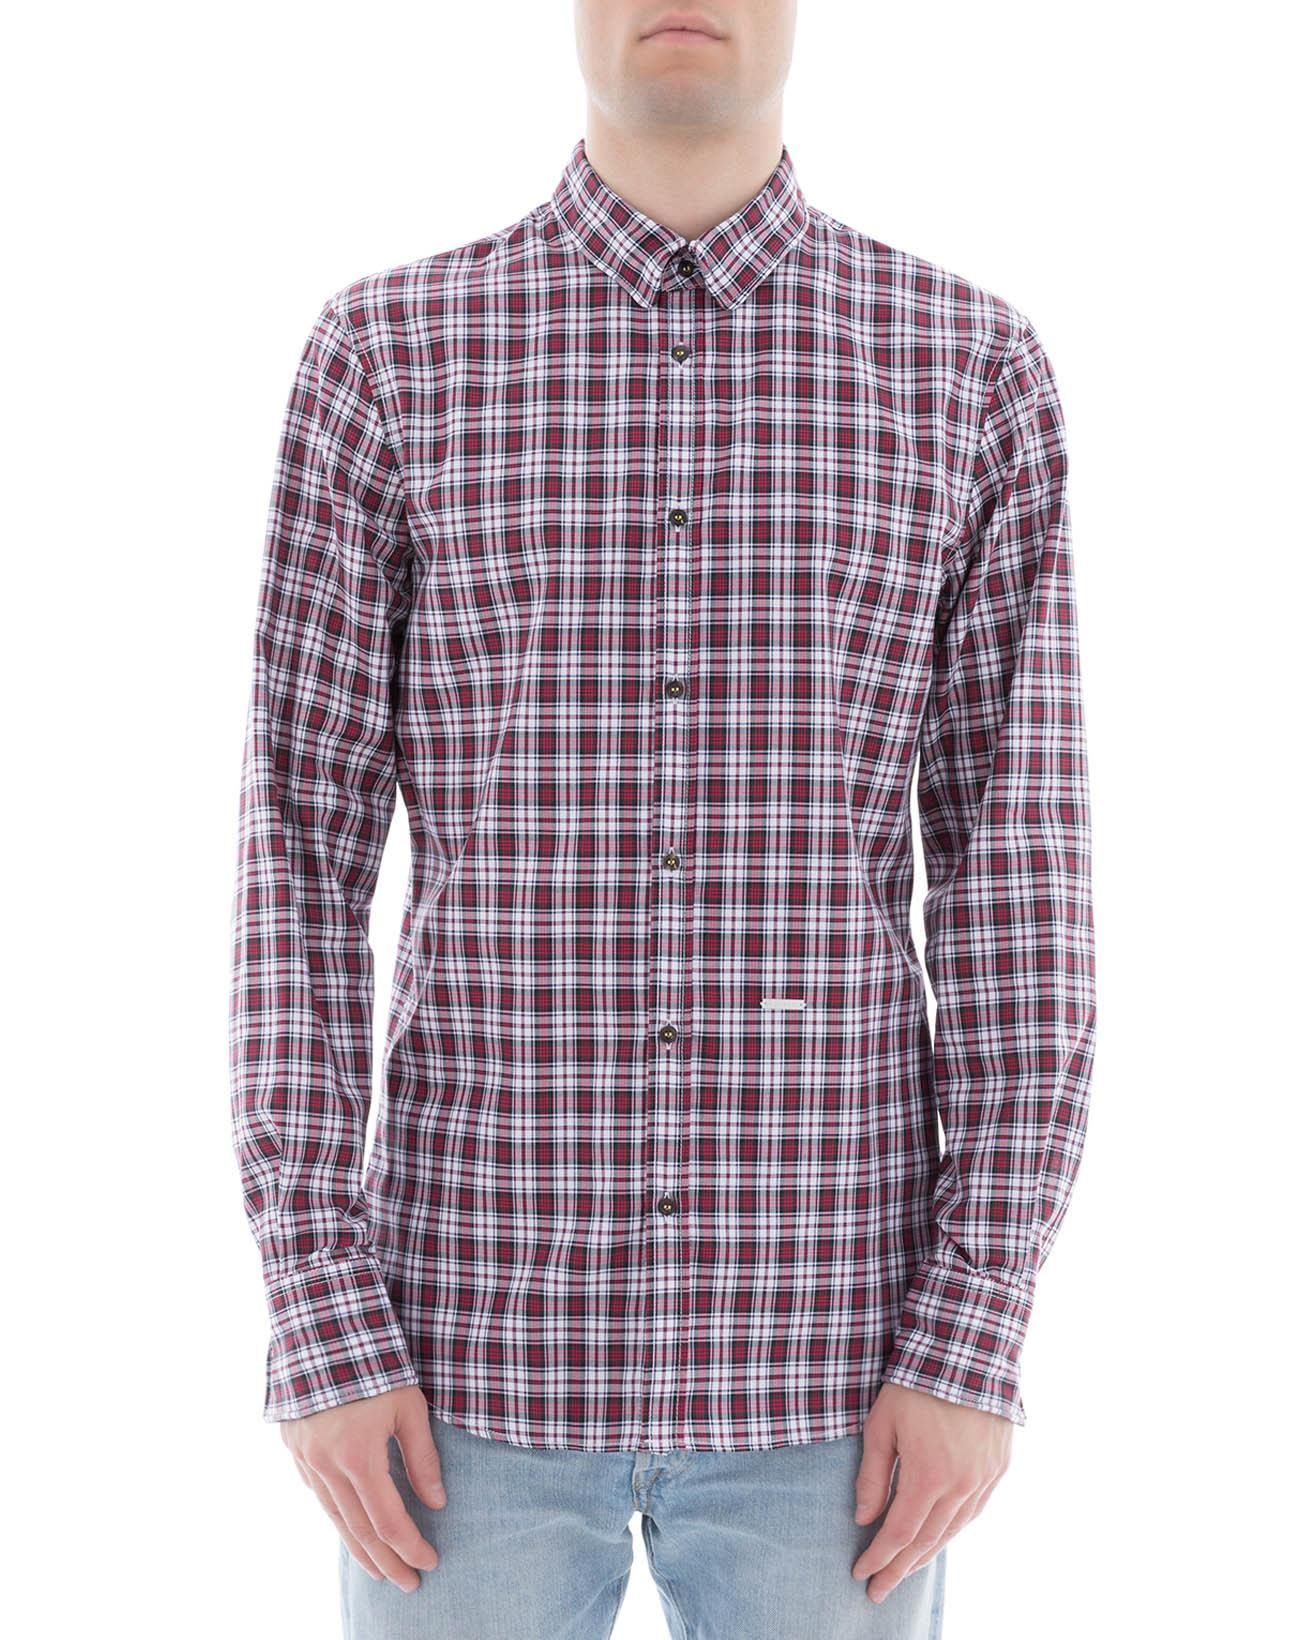 DSQUARED2 RED COTTON SHIRT,10606707